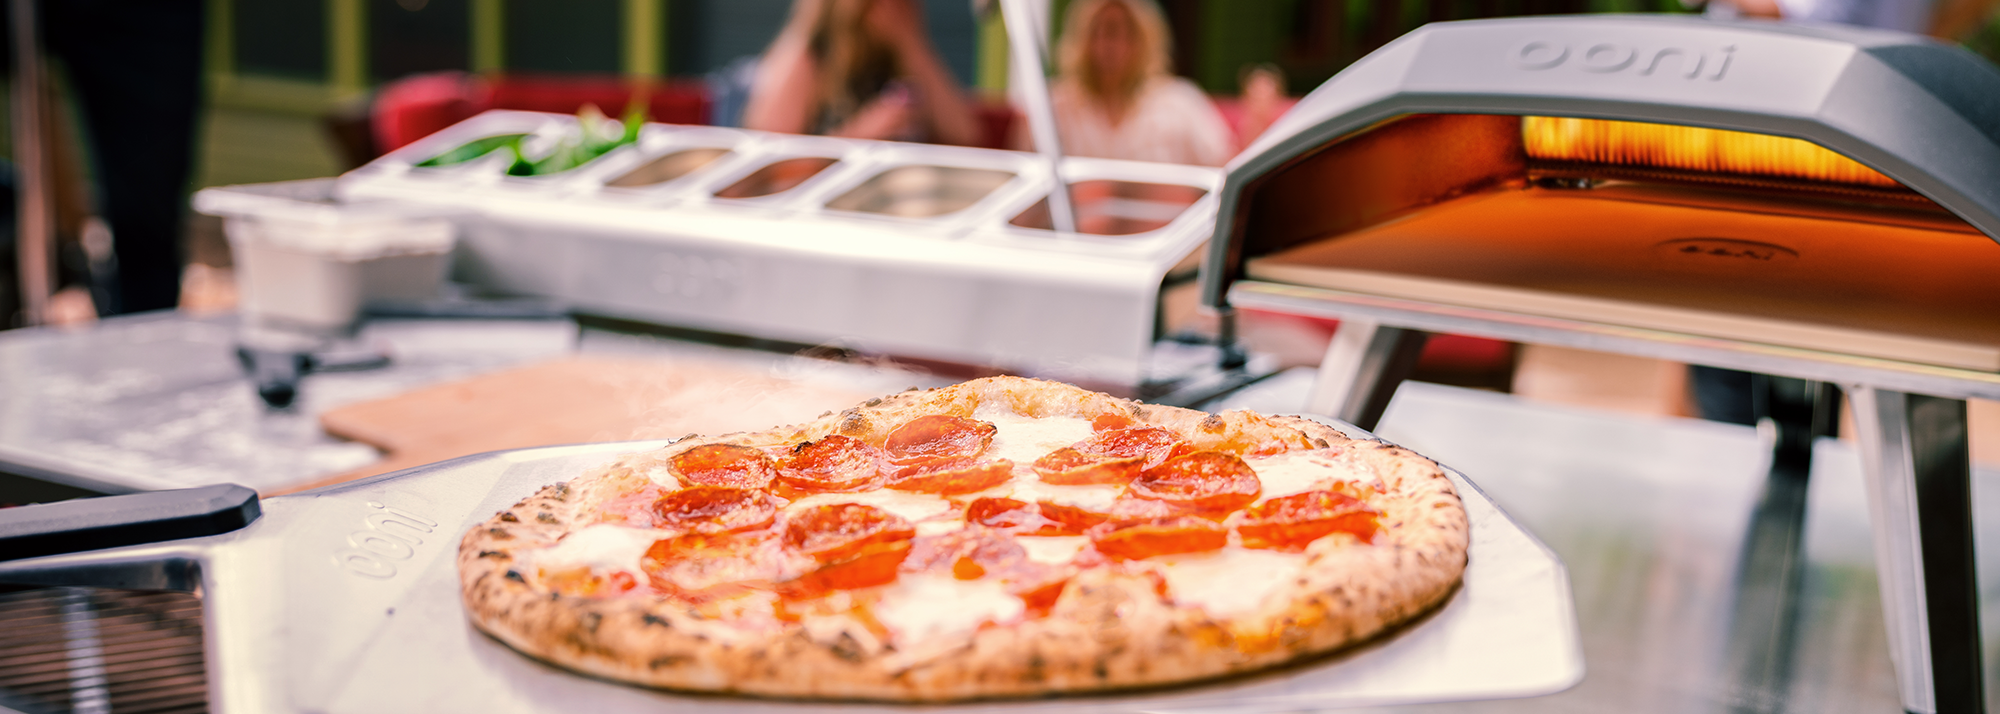 Win an Ooni pizza oven